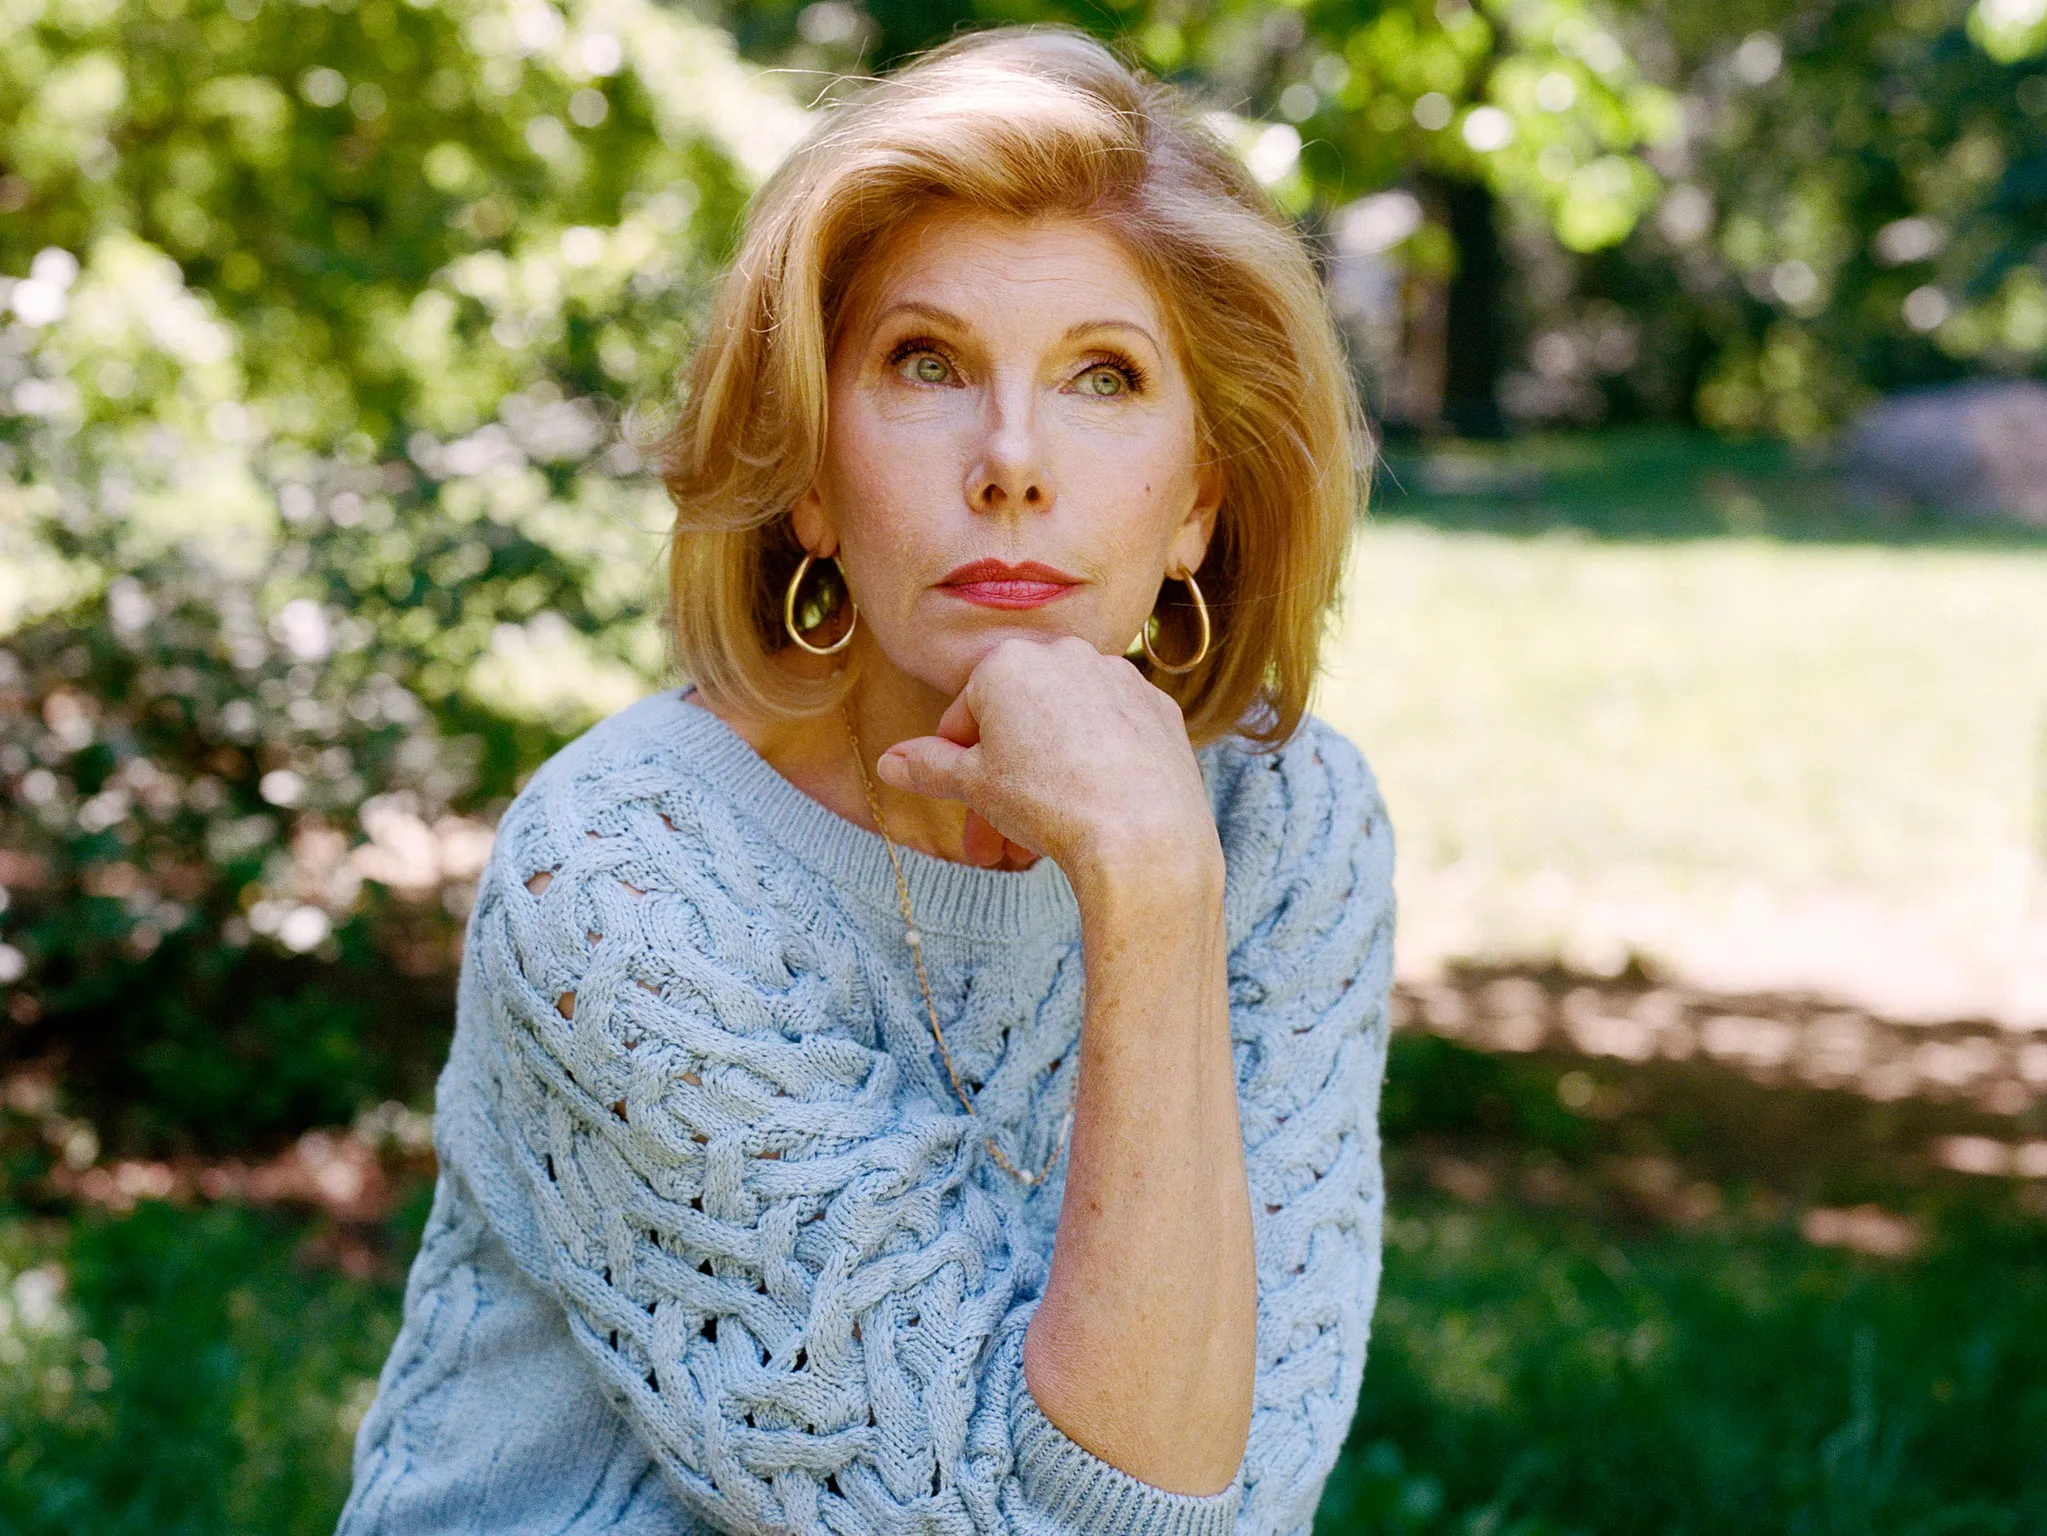 What is known about Christine Baranski’s personal life and relationships